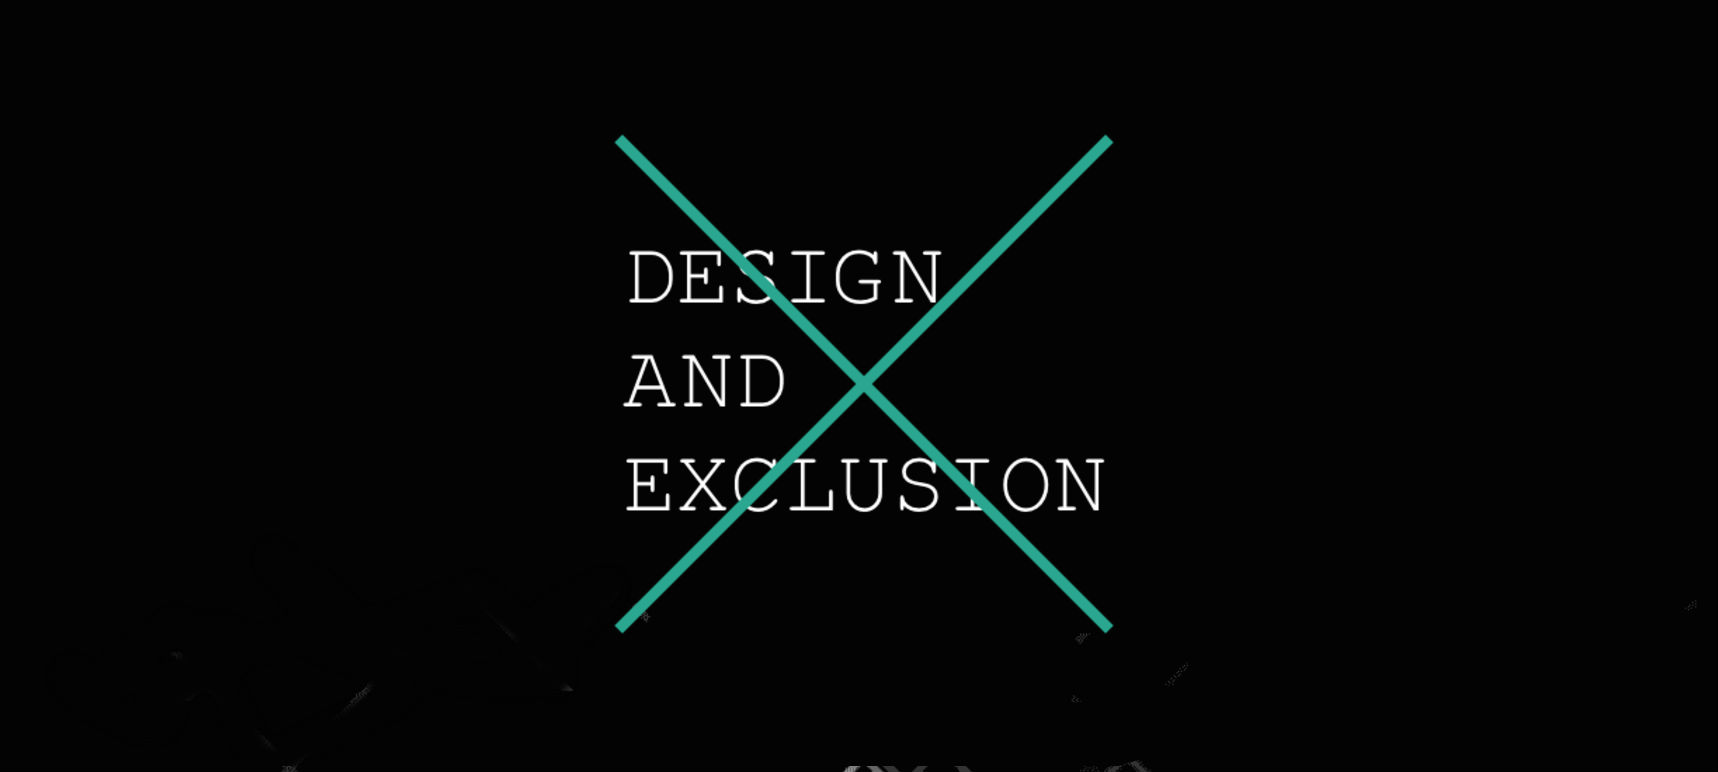 Automattic to Host a Free, Remote Conference on Design and Exclusion on April 21